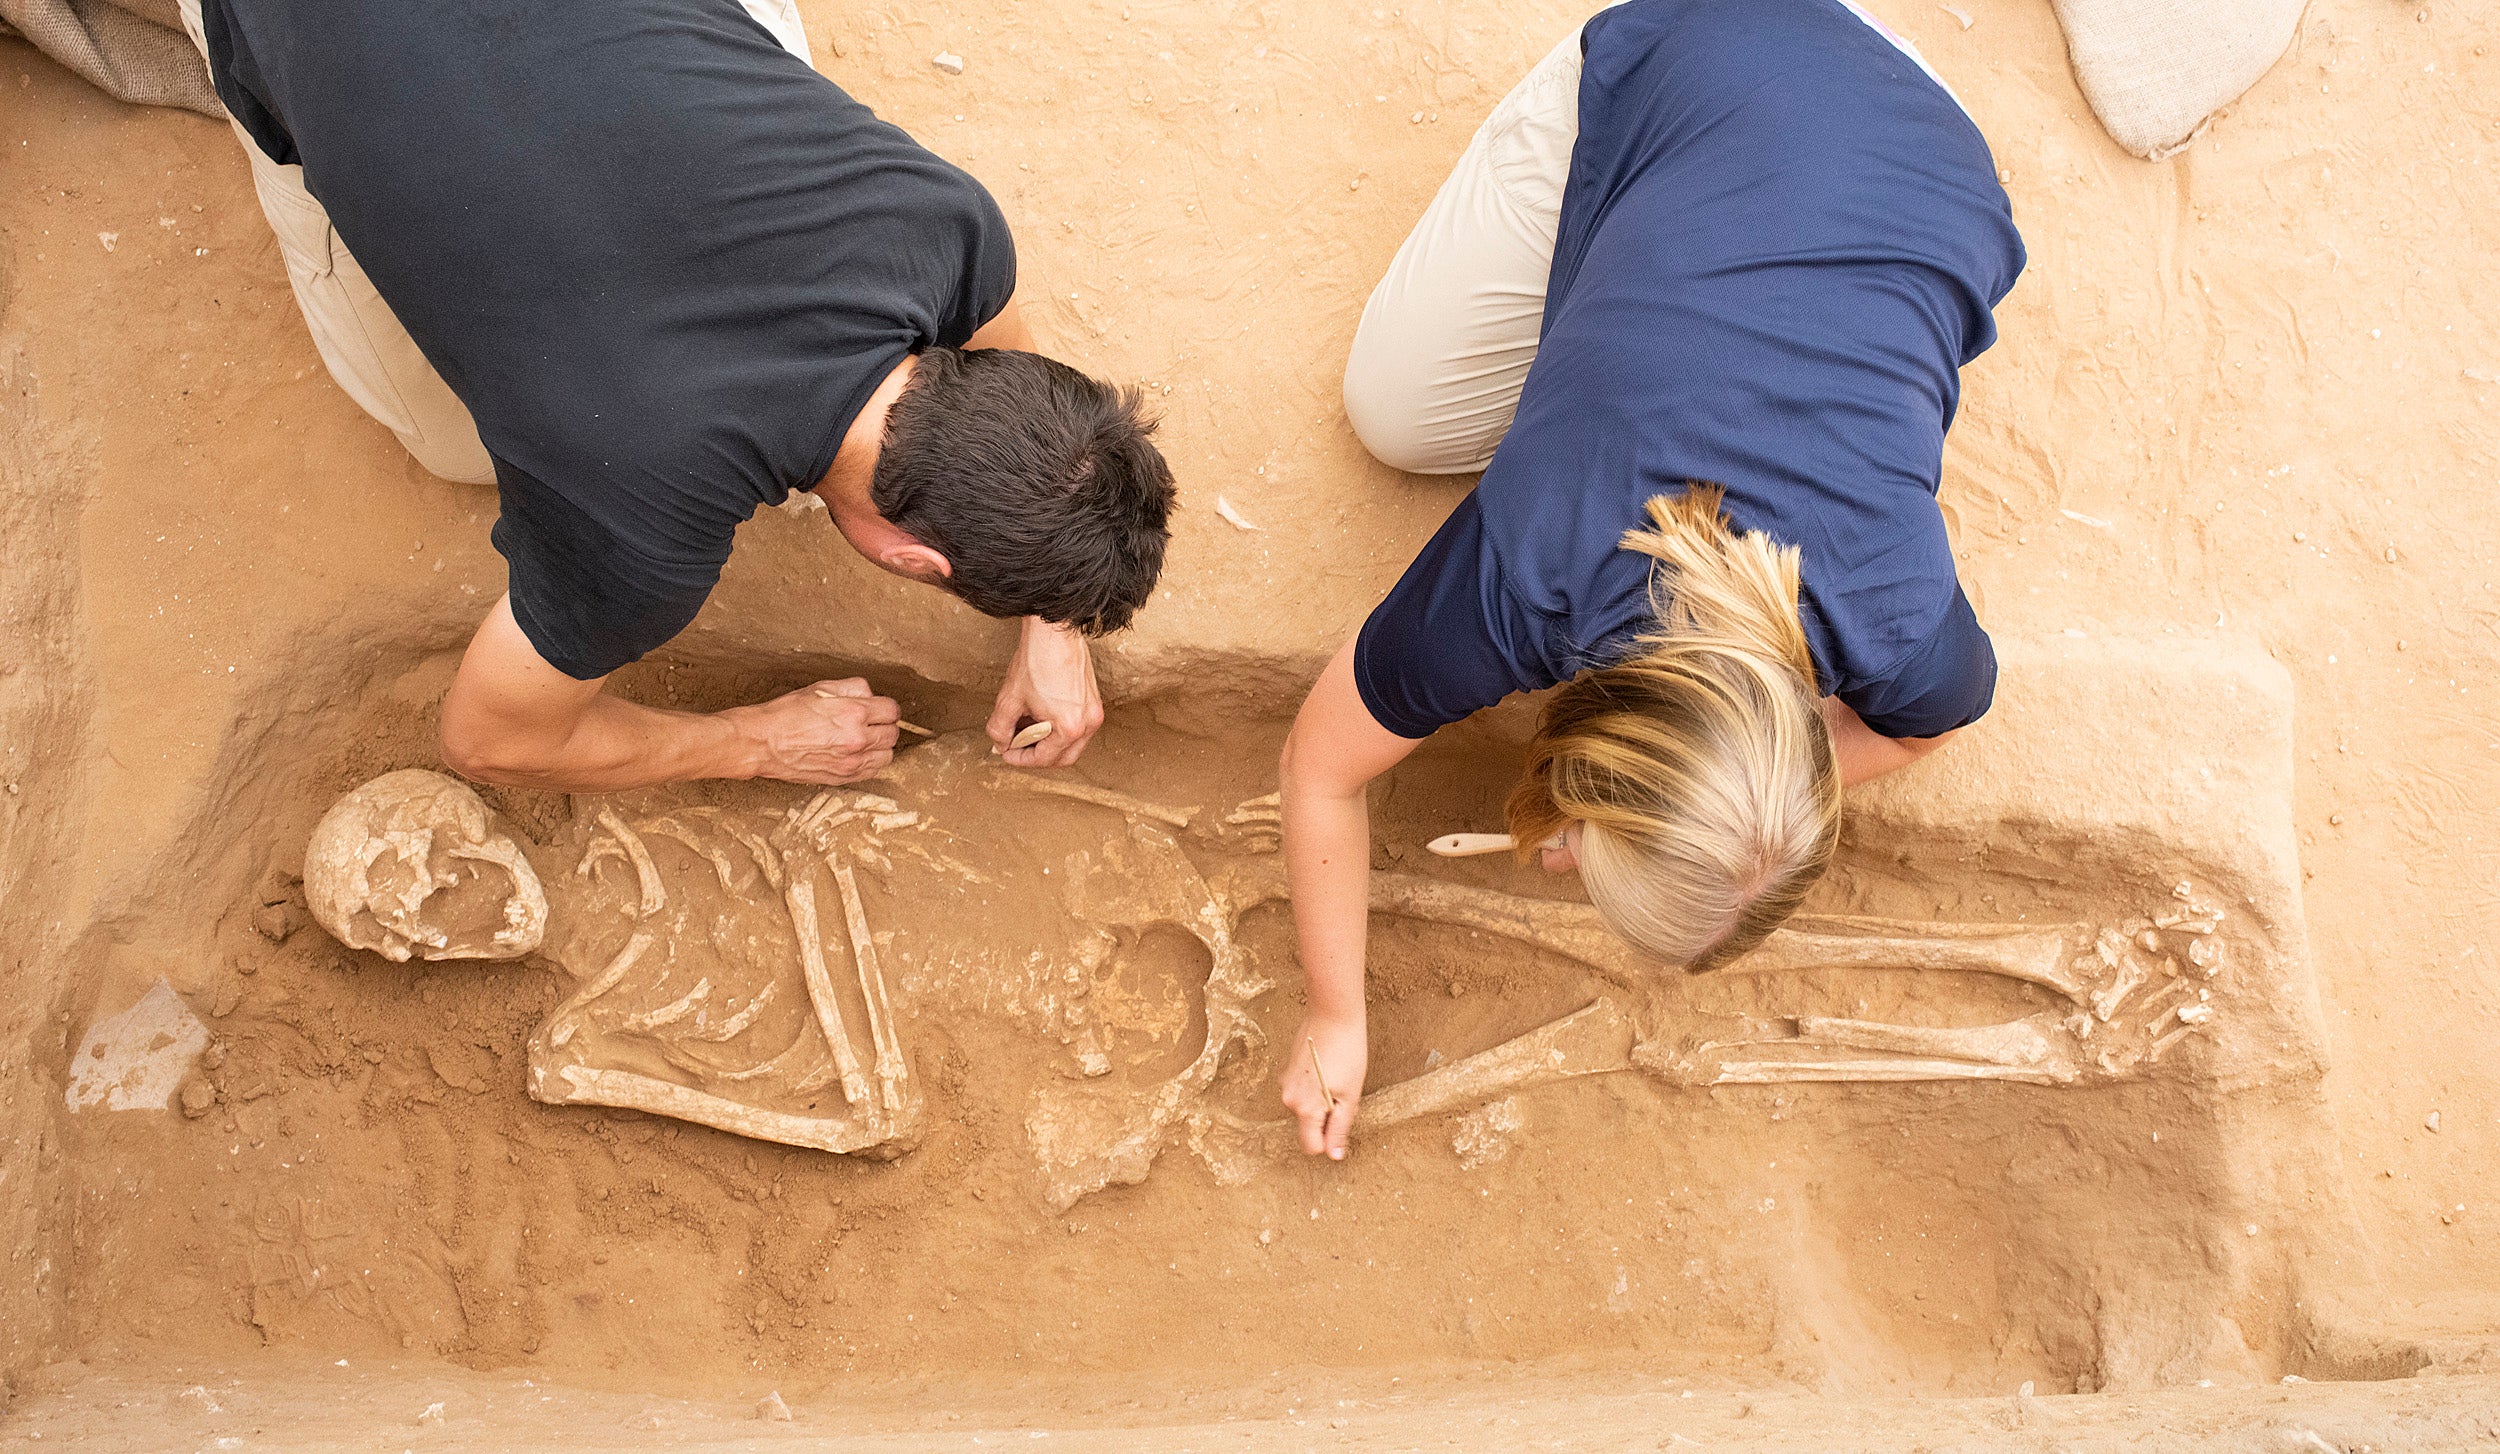 Archeologists excavating a skeleton